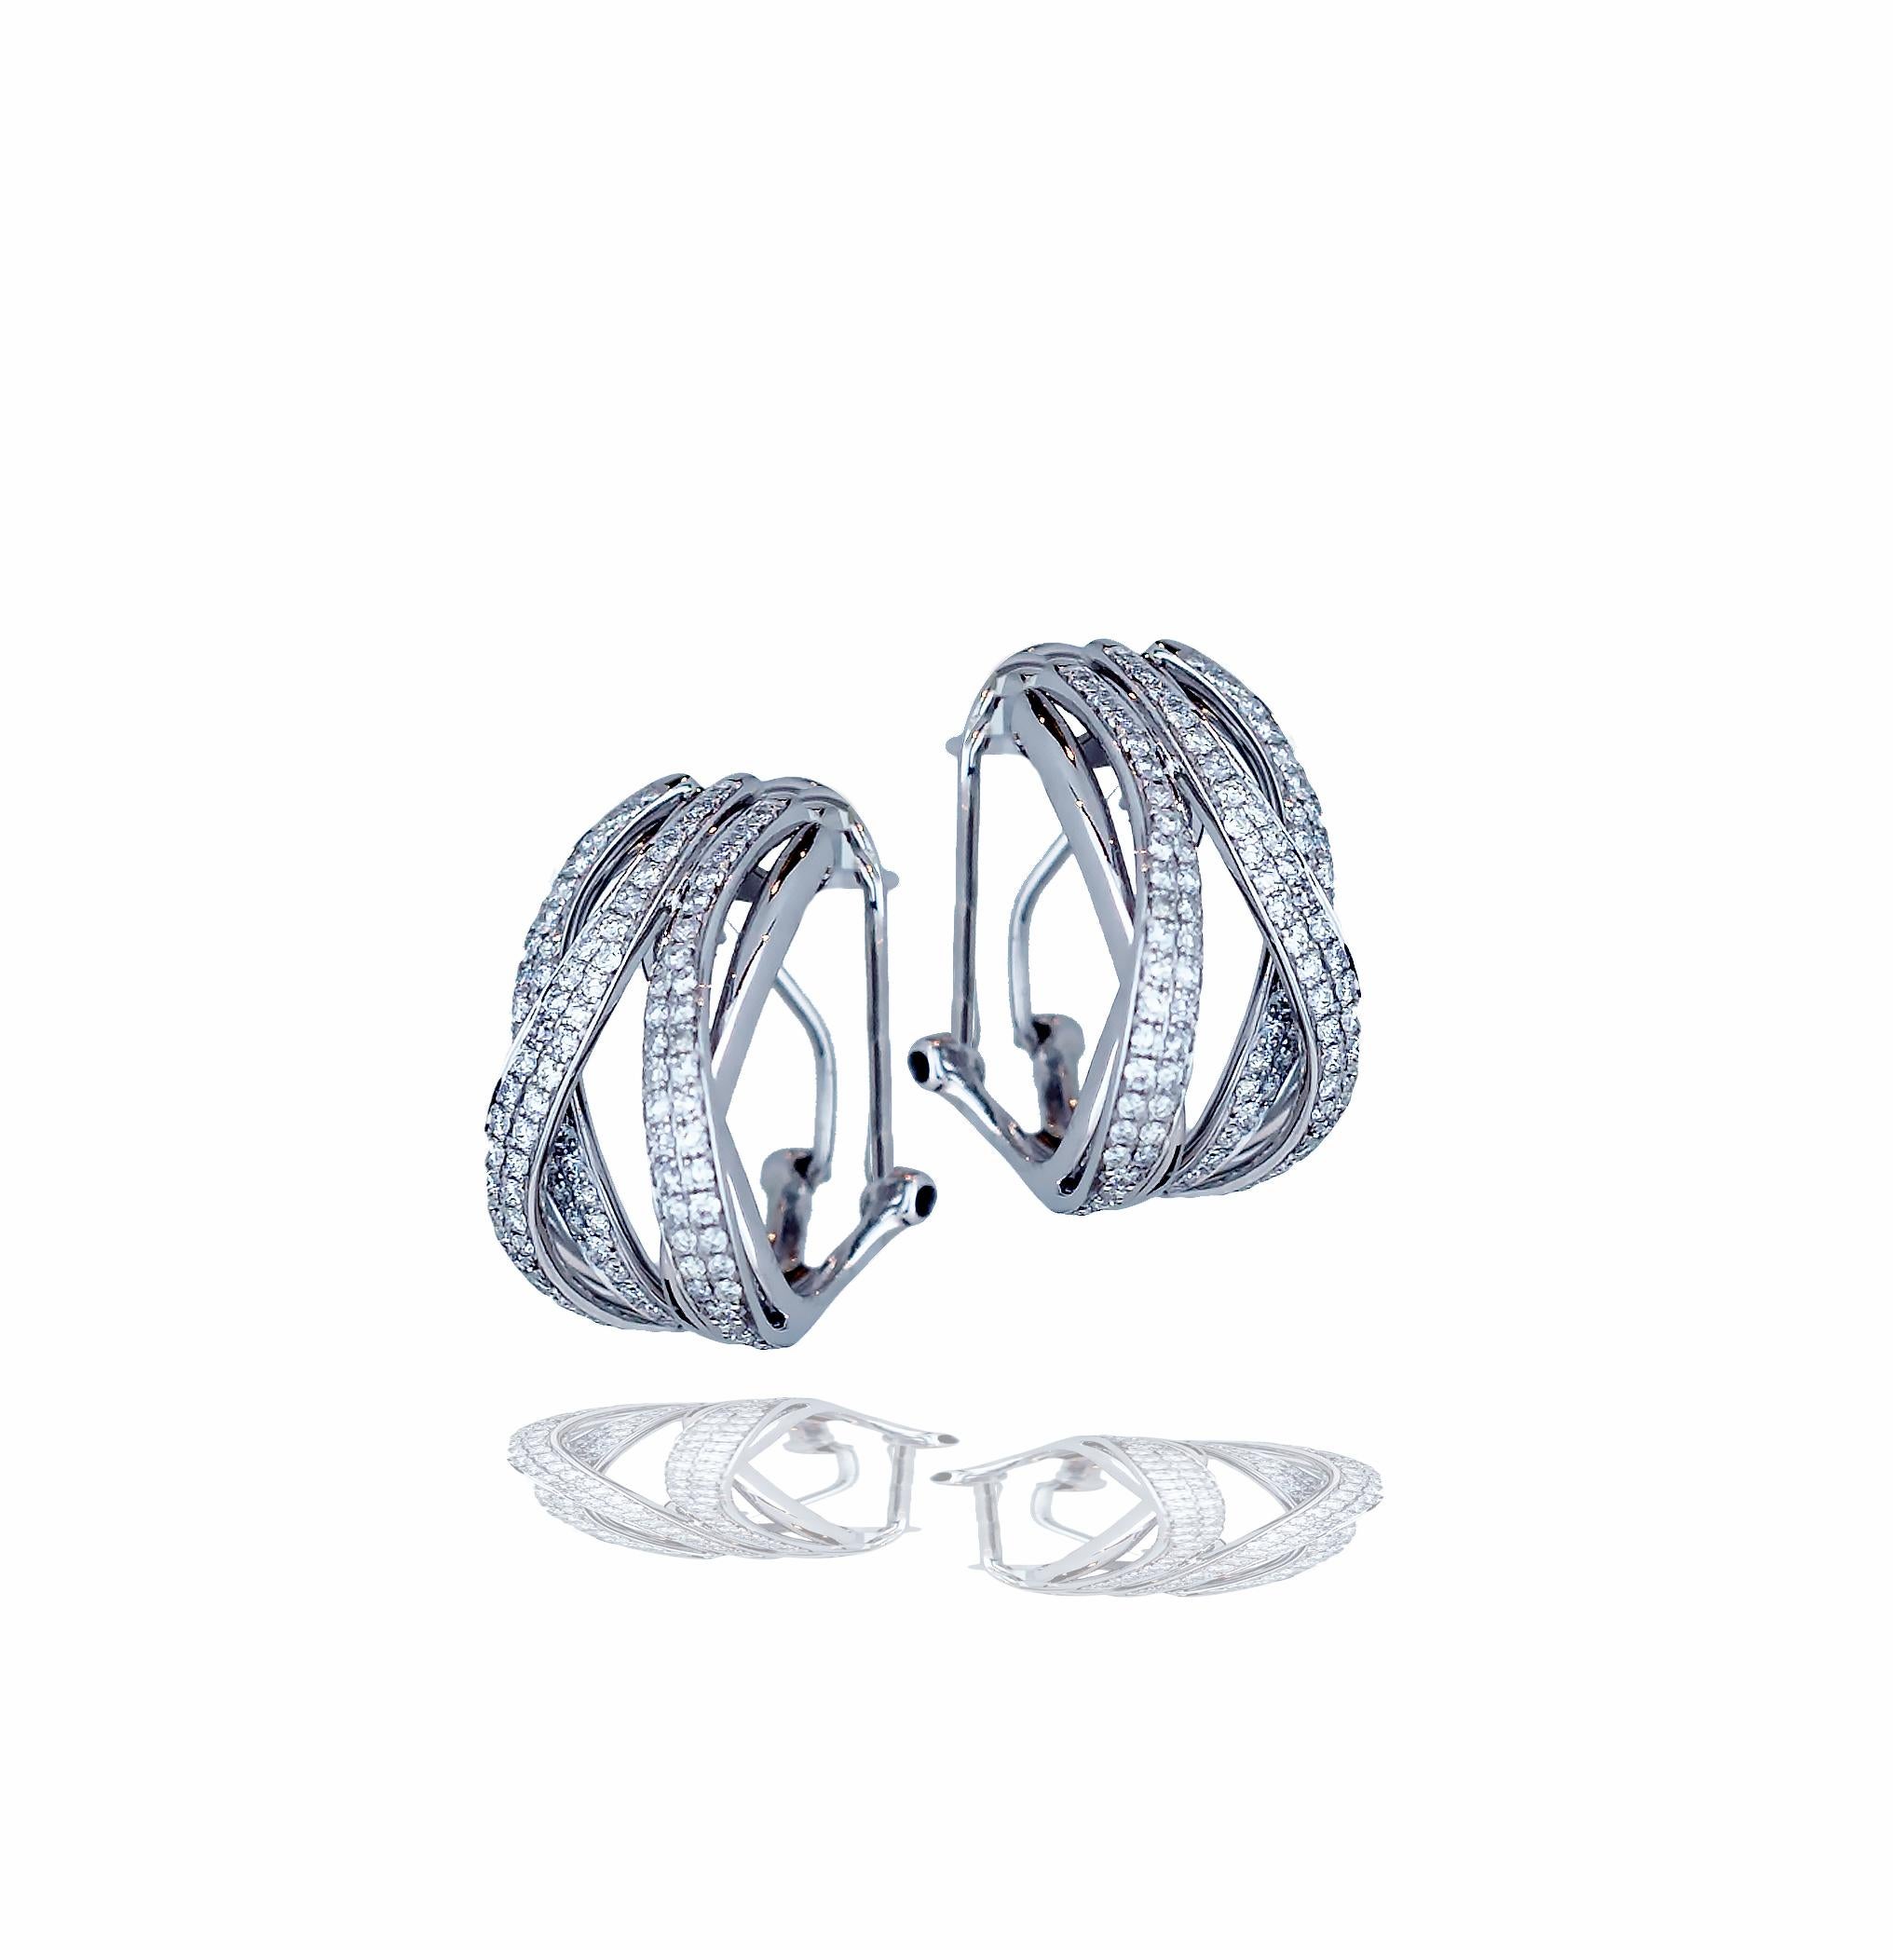 A stunning pair of daily wear can be seen in these criss-cross diamond hoops.  The hoops measure 12 mm and have lever backings.  The hoops weigh approximately 12 grams and have over one hundred diamonds that are F-G VS-SI color and clarity.  The